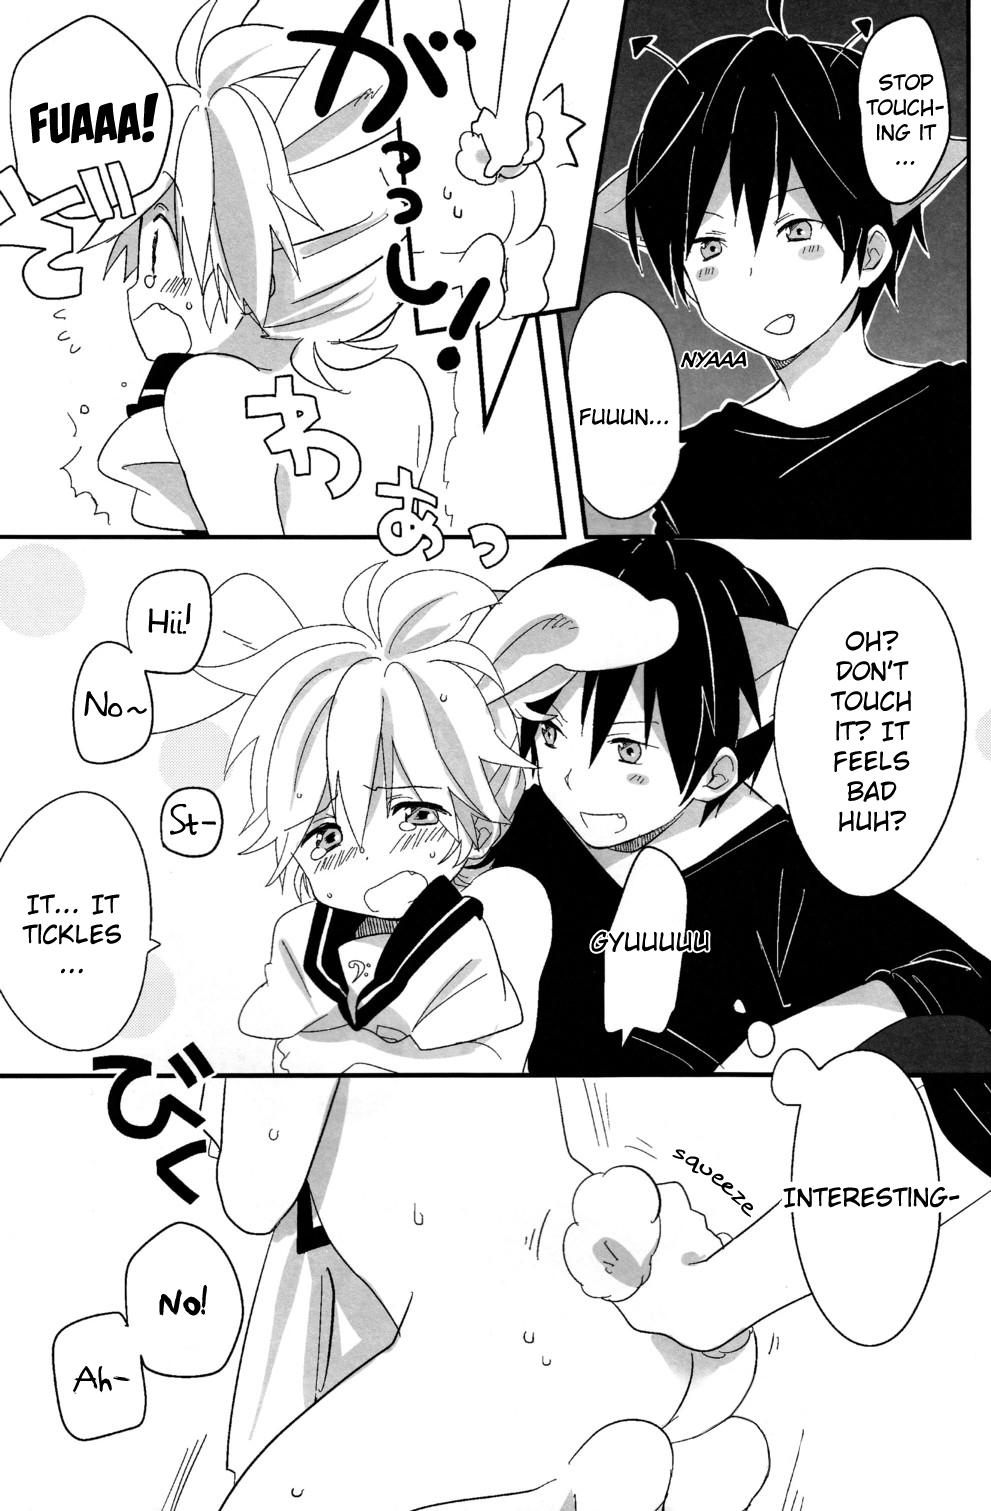 Butthole [Hey you! (Non)] Ookami-san to Usagi-chan (Vocaloid) [English] {Chin²} - Vocaloid Tight - Page 9